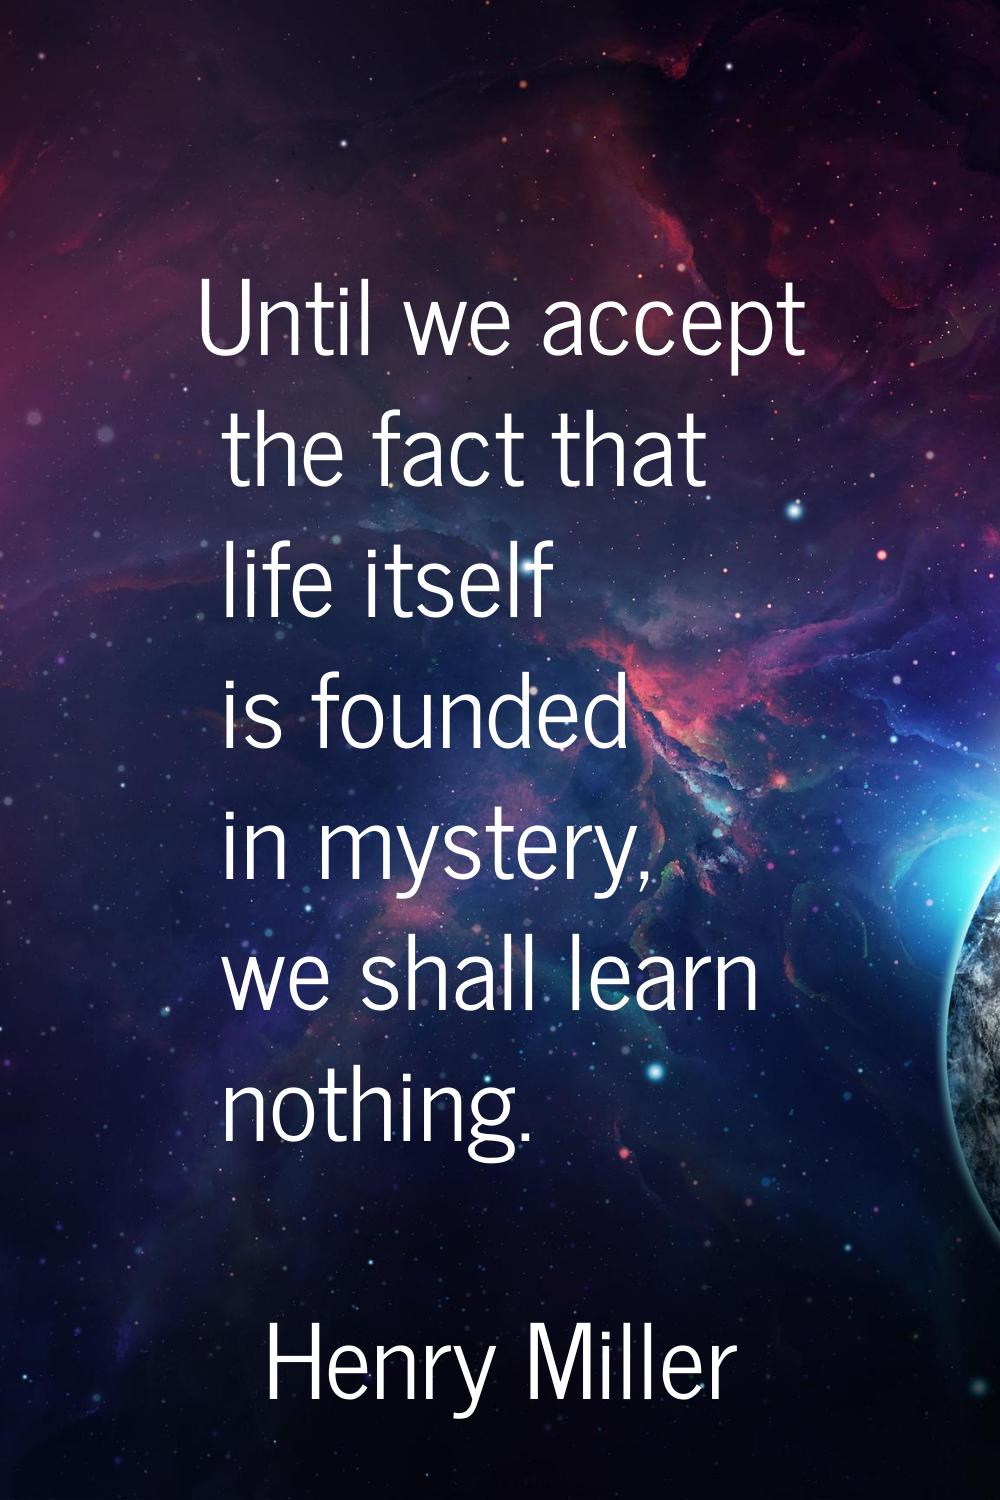 Until we accept the fact that life itself is founded in mystery, we shall learn nothing.